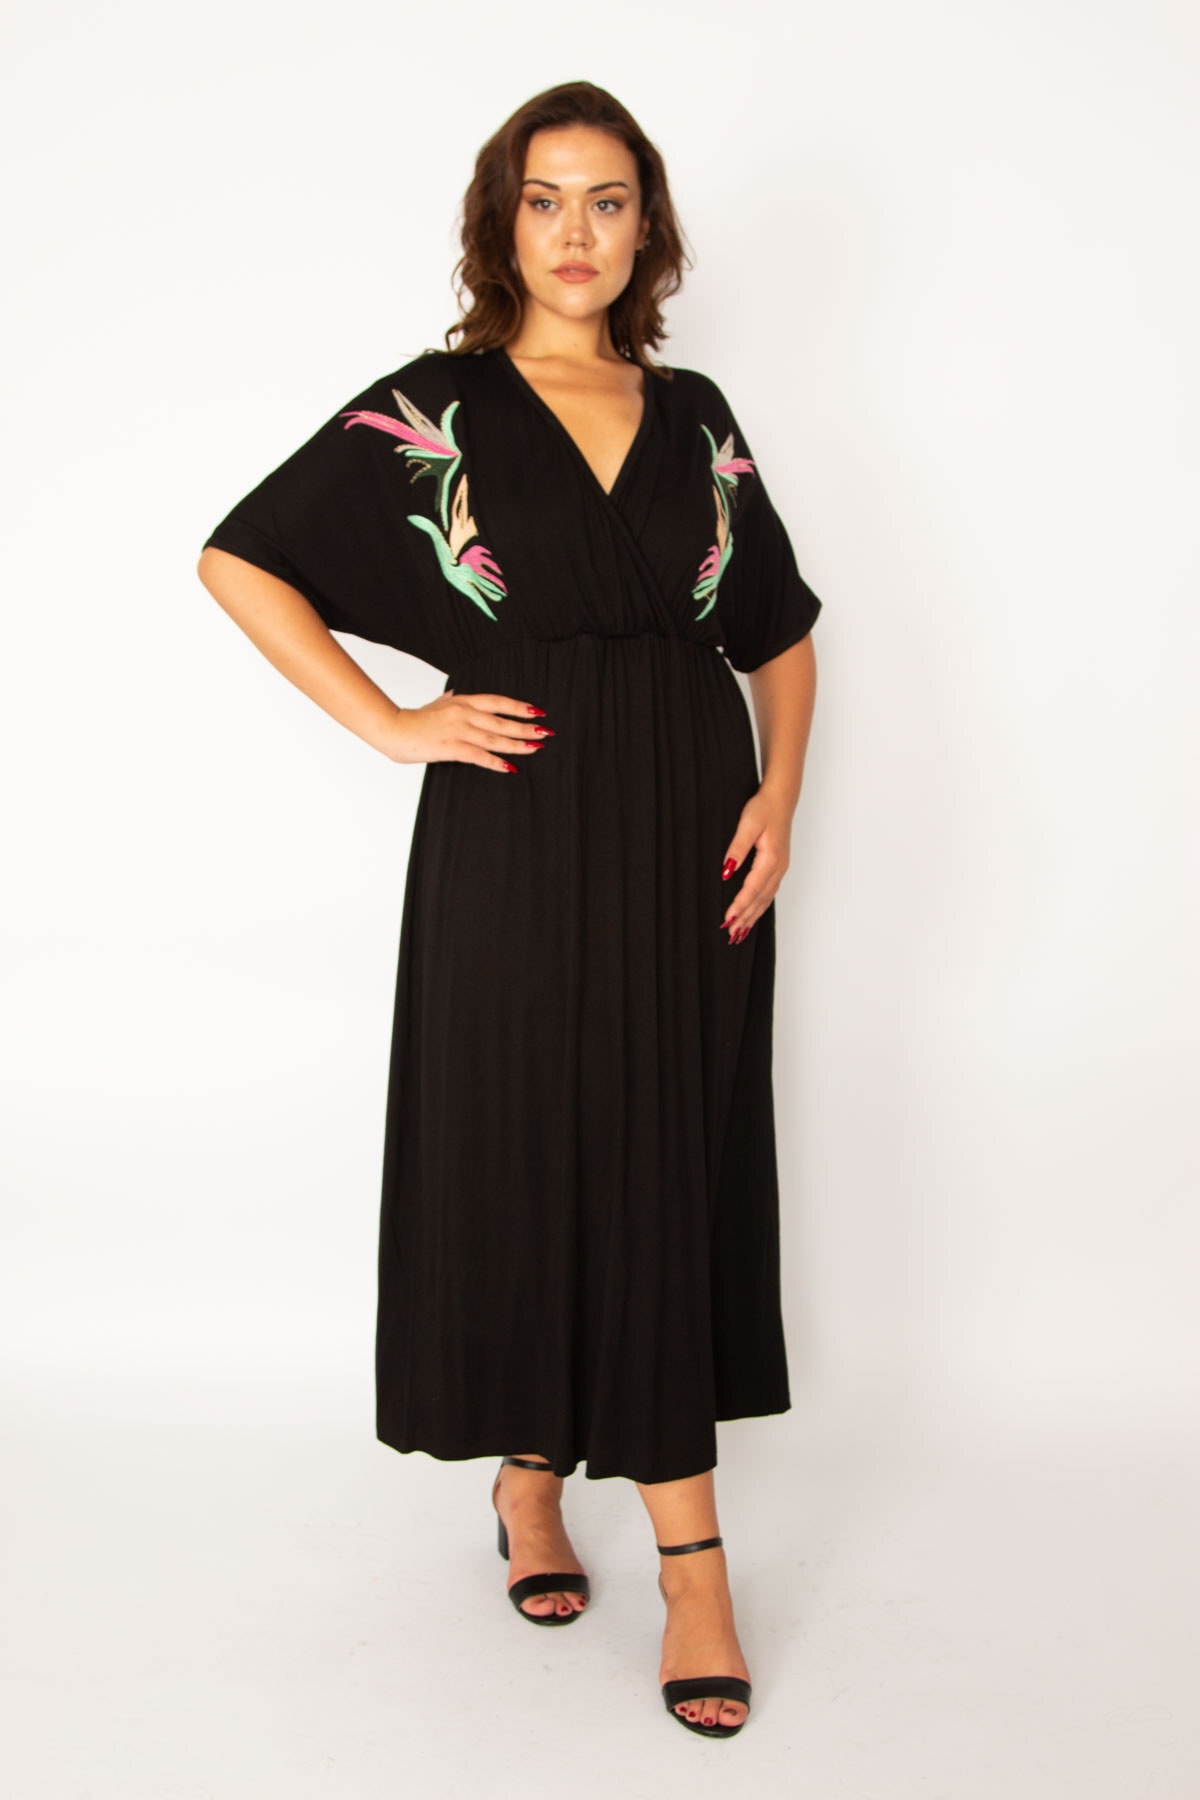 Şans Women's Plus Size Black Wrapover Collar Dress With Elastic Waist And Embroidery Detail